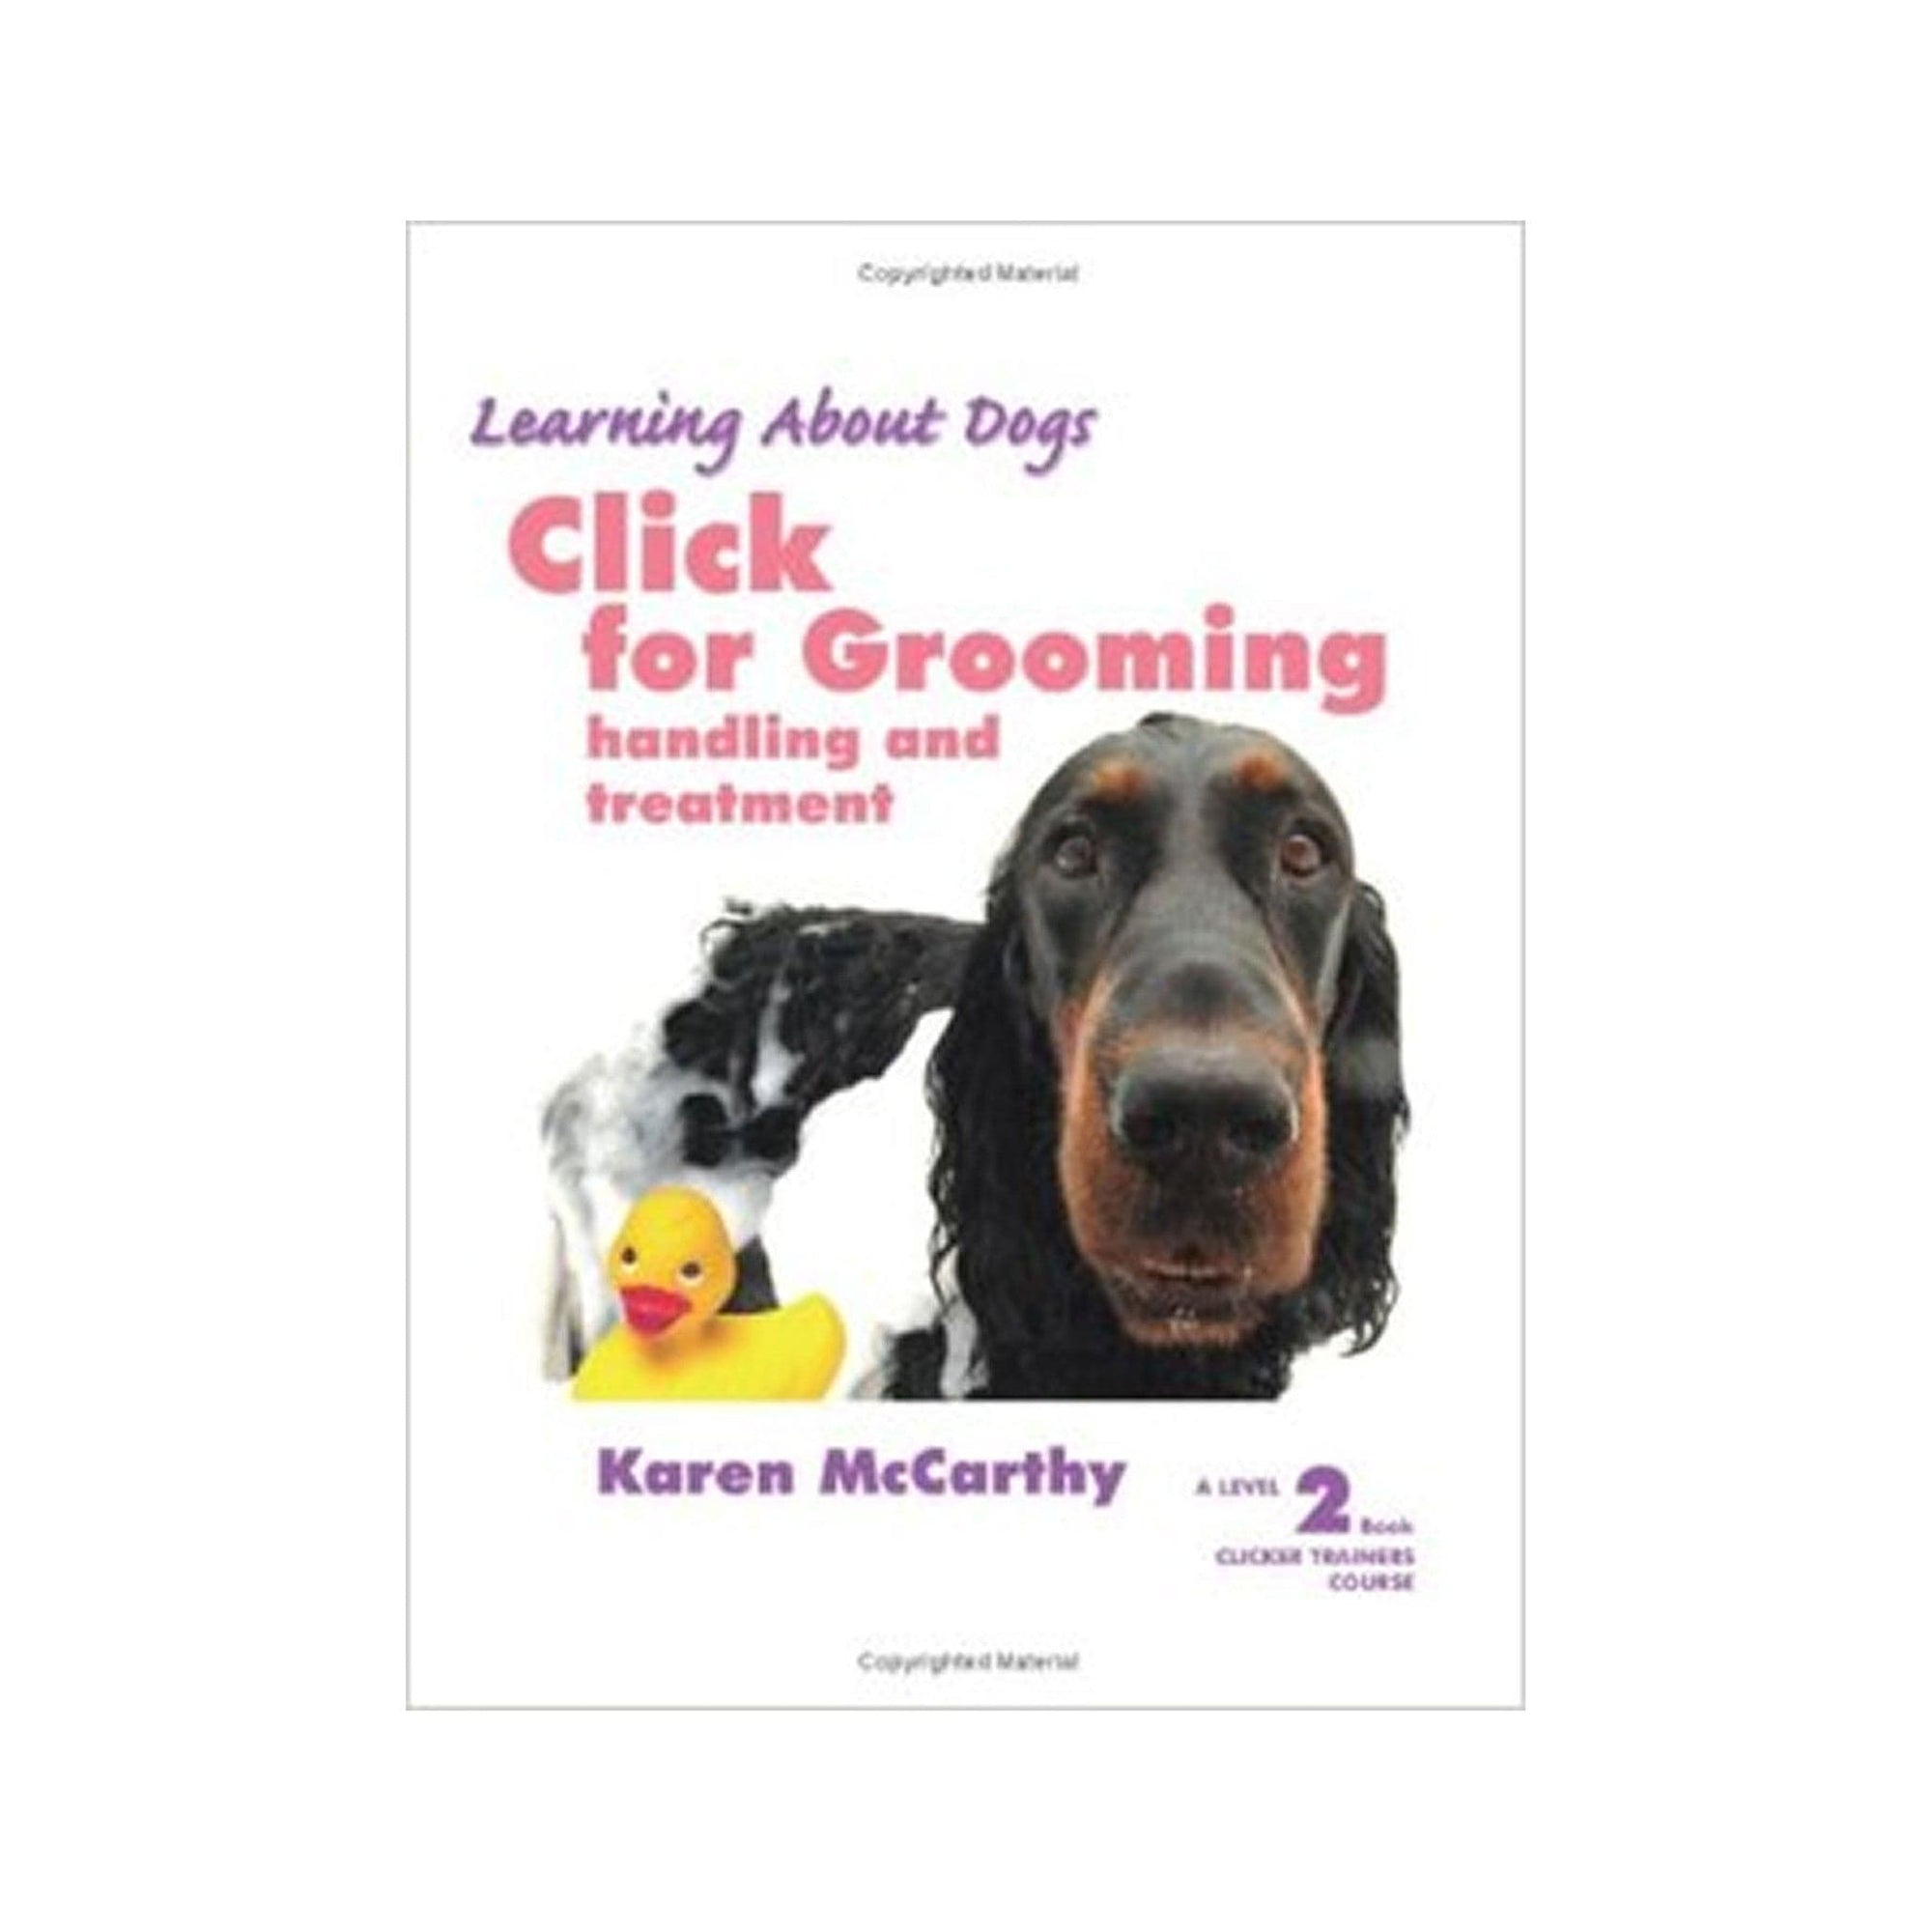 E-BOOK Click for Grooming Handling and Treatment by Karen McCarthy